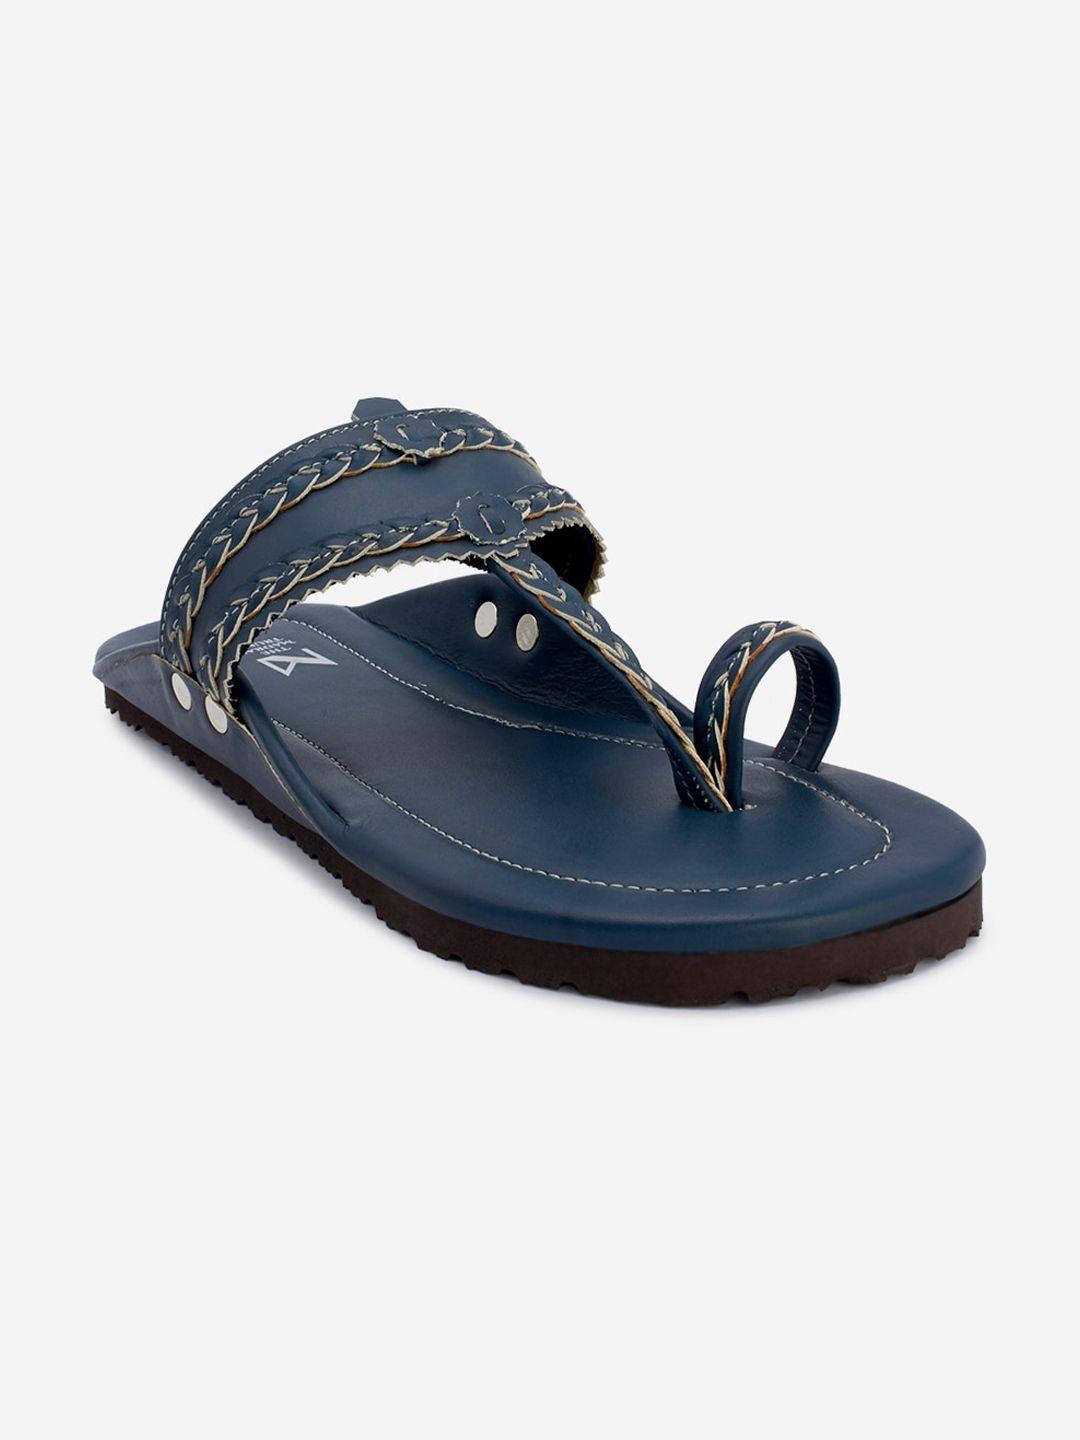 the madras trunk men navy blue kolhapuris printed one toe comfort sandals with embroidered